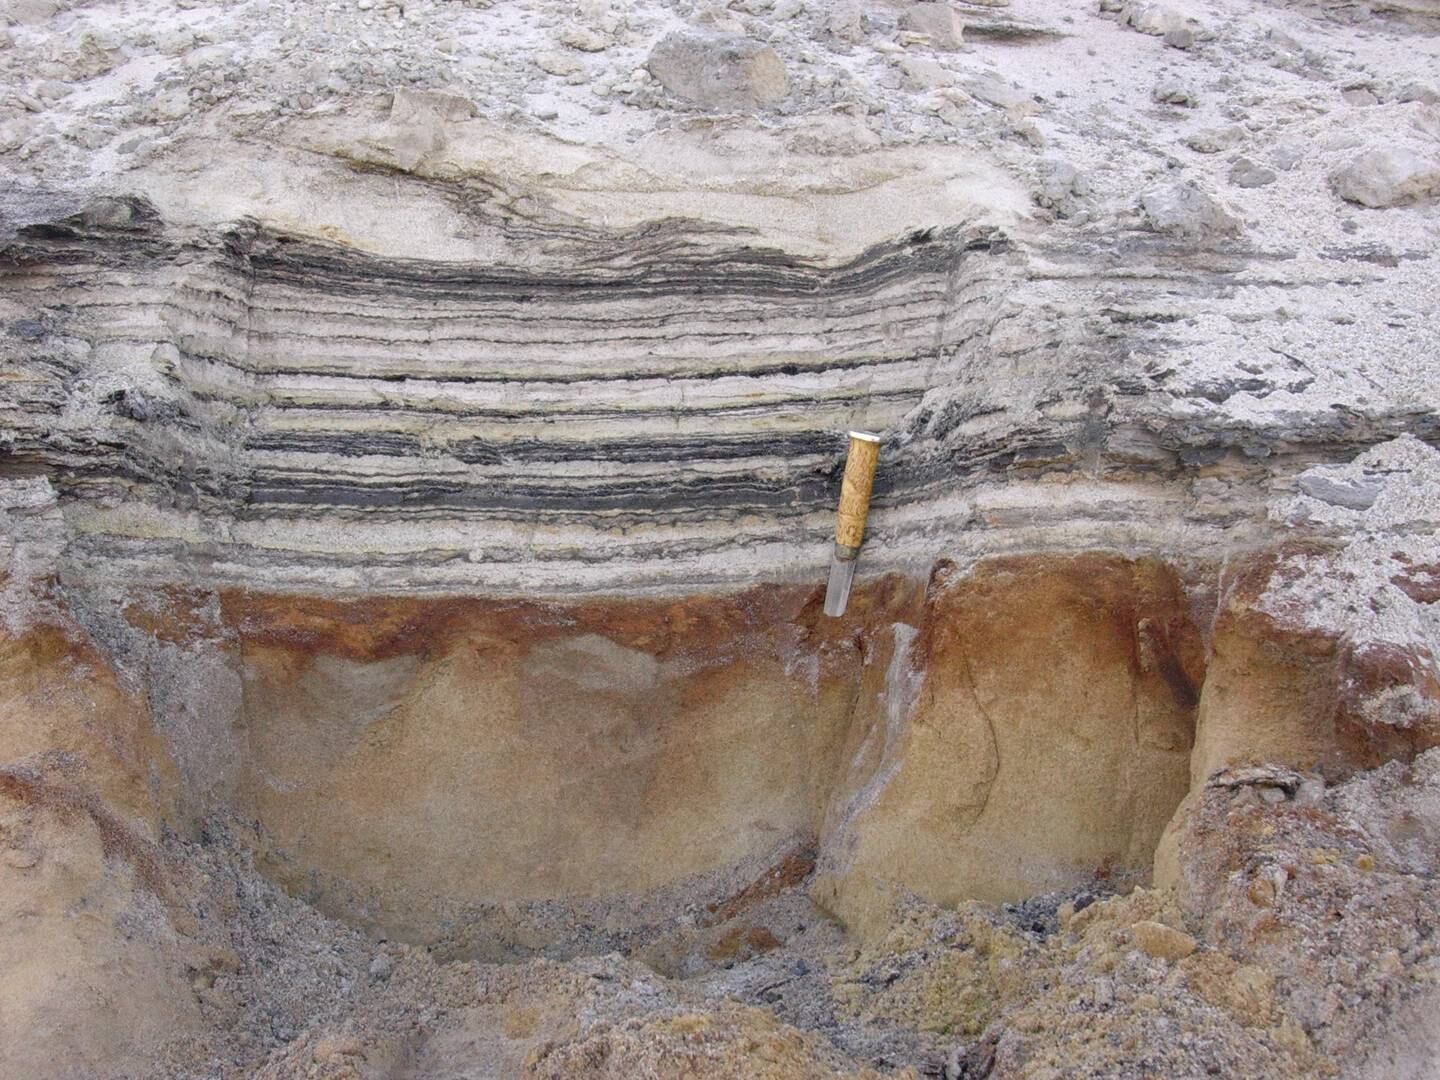 The organic layers show traces of the rich plant flora and insect fauna that lived two million years ago at Kap København in North Greenland. Photo: Professor Svend Funder